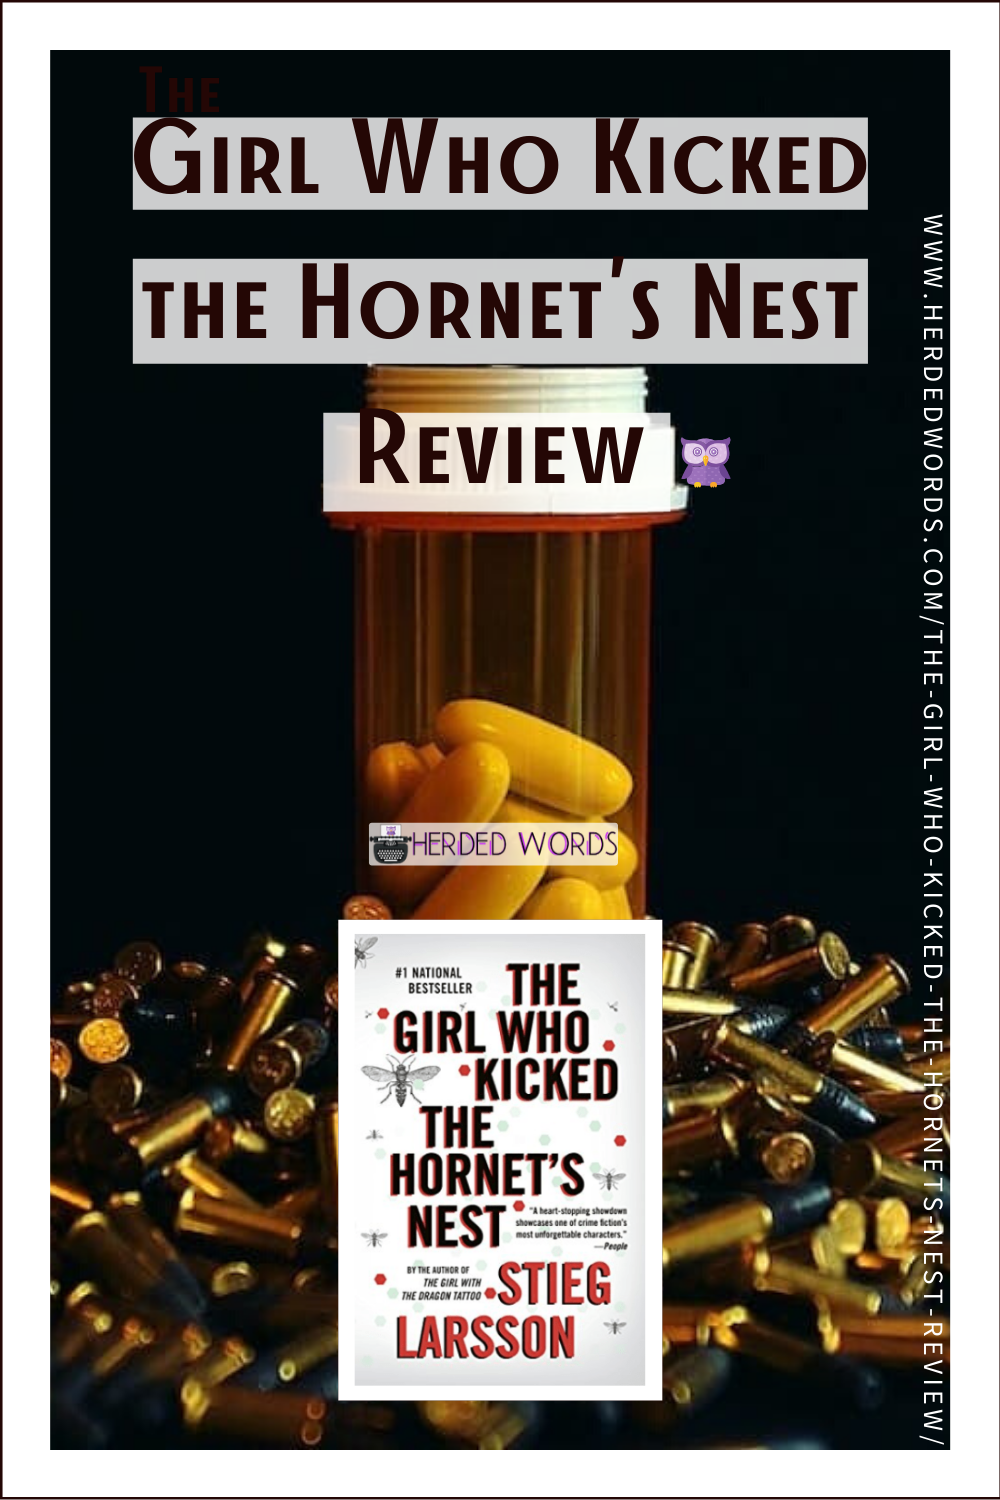 Pin This: Book Review & Analysis of THE GIRL WHO KICKED THE HORNET'S NEST